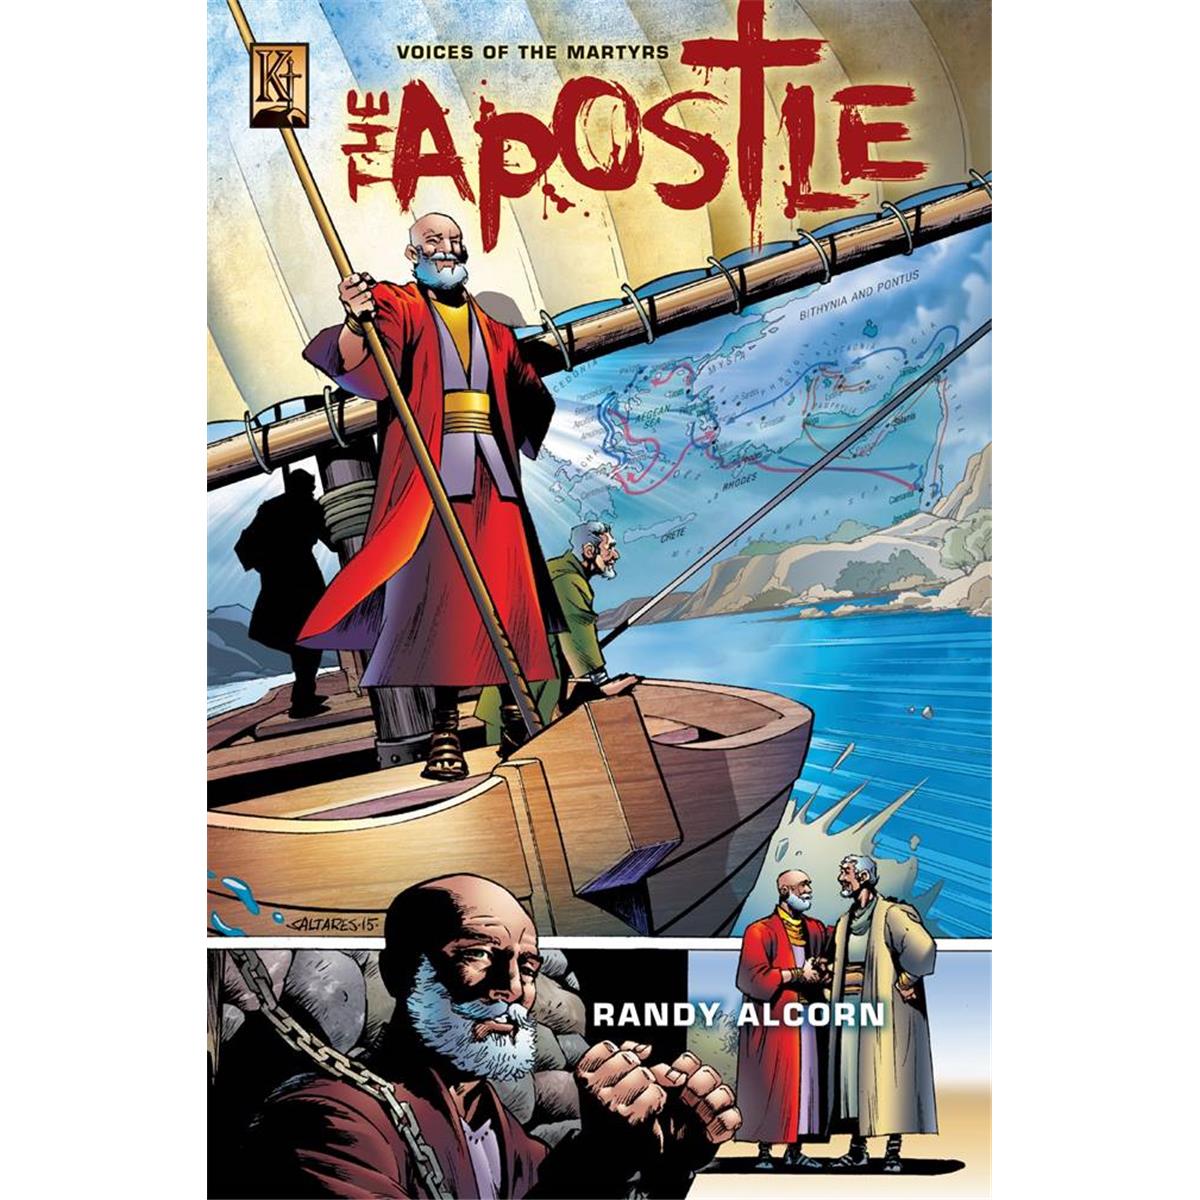 Voice Of The Martyrs 159052 Apostle The Graphic Novel